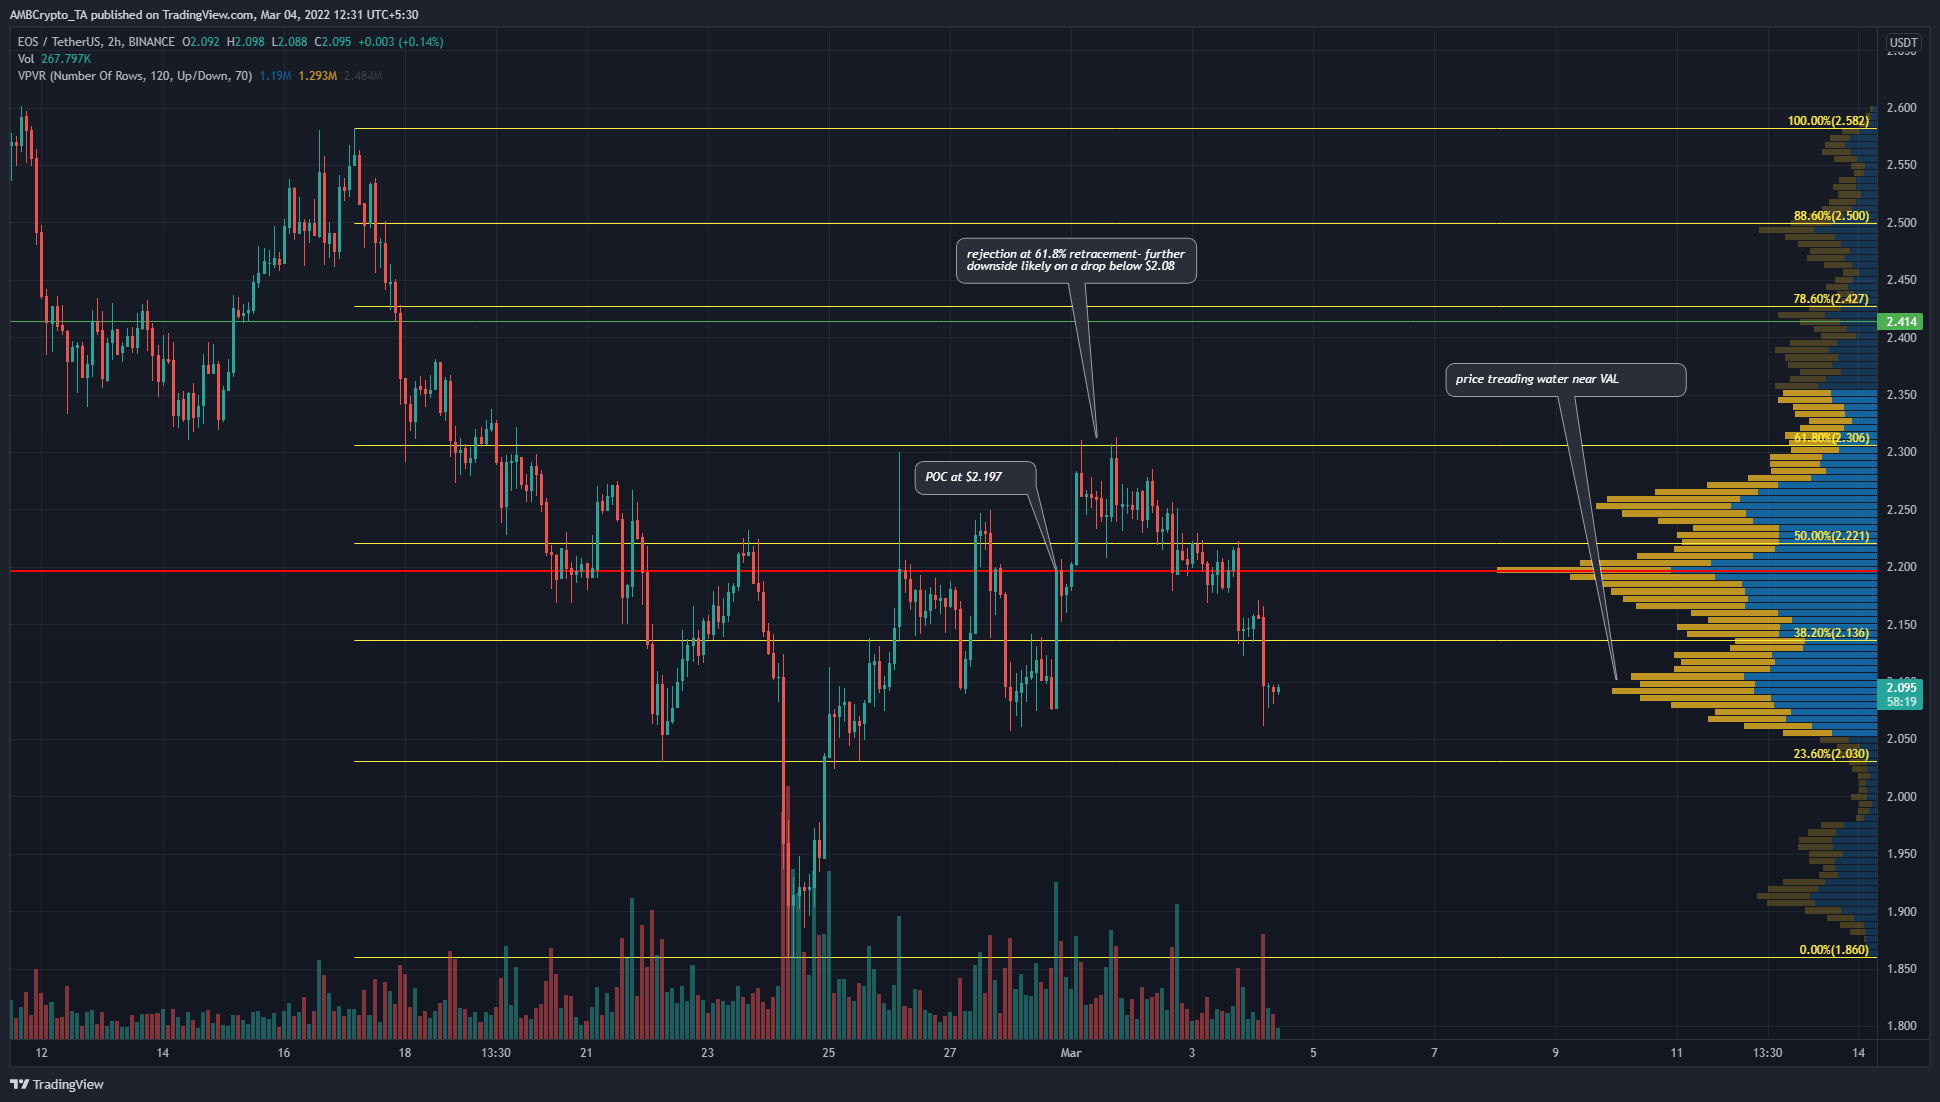 EOS could be set to plumb new depths if the bulls can't defend this area